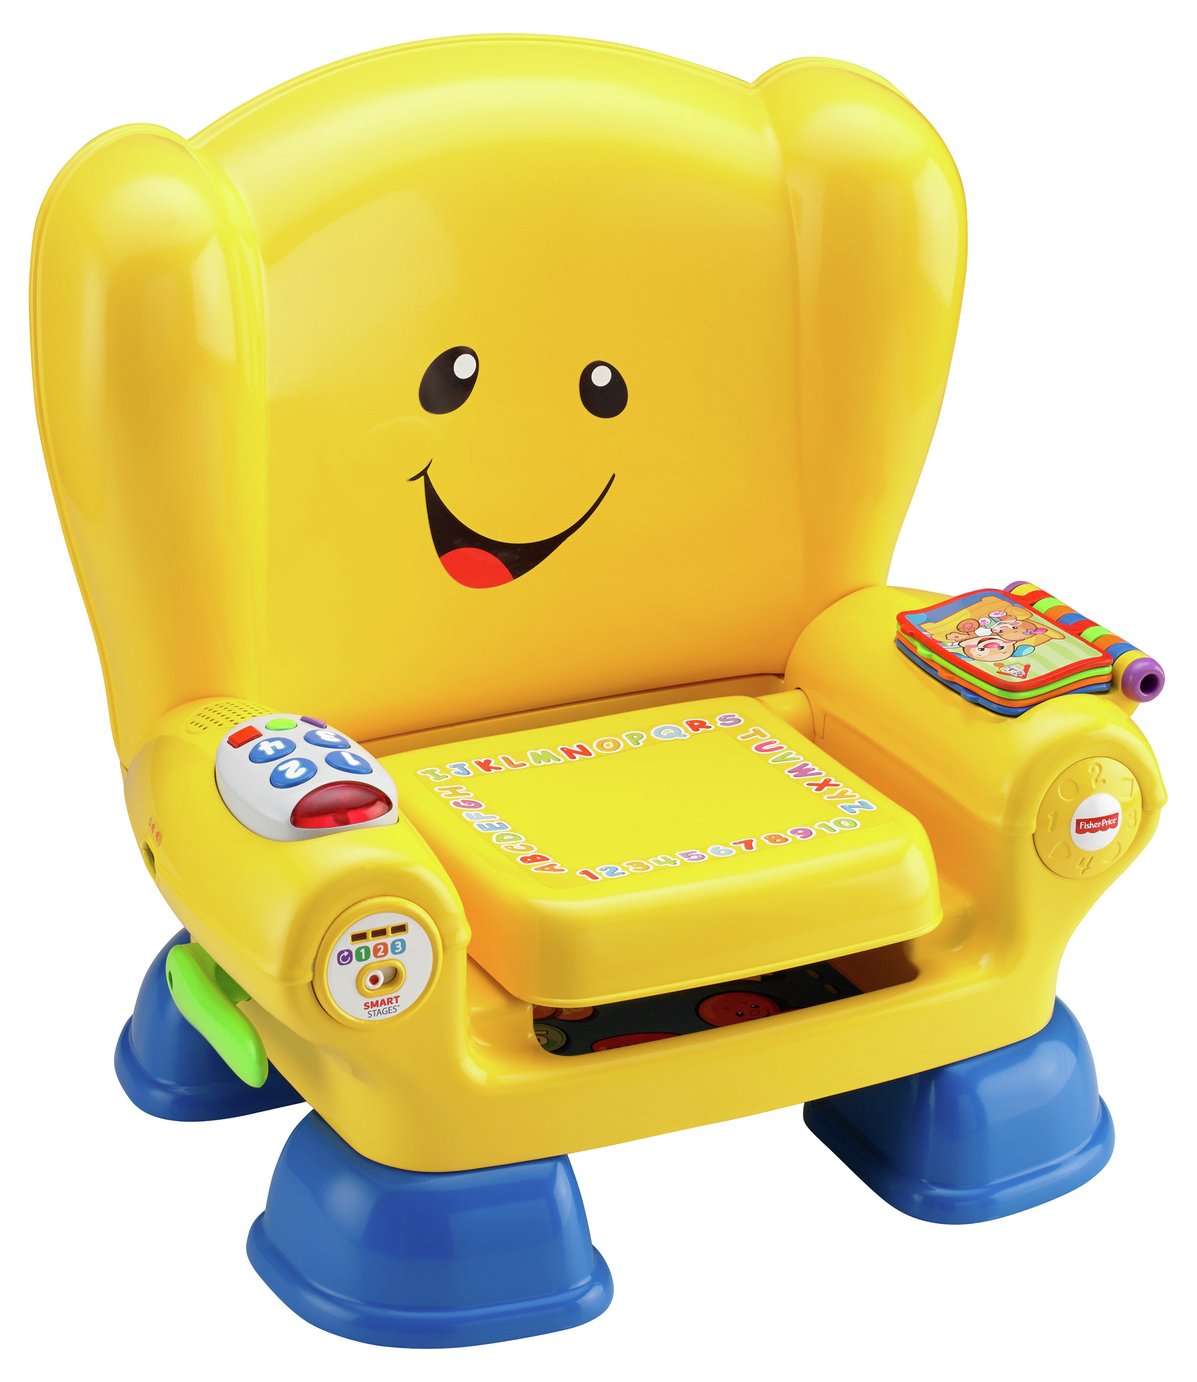 vtech learning chair